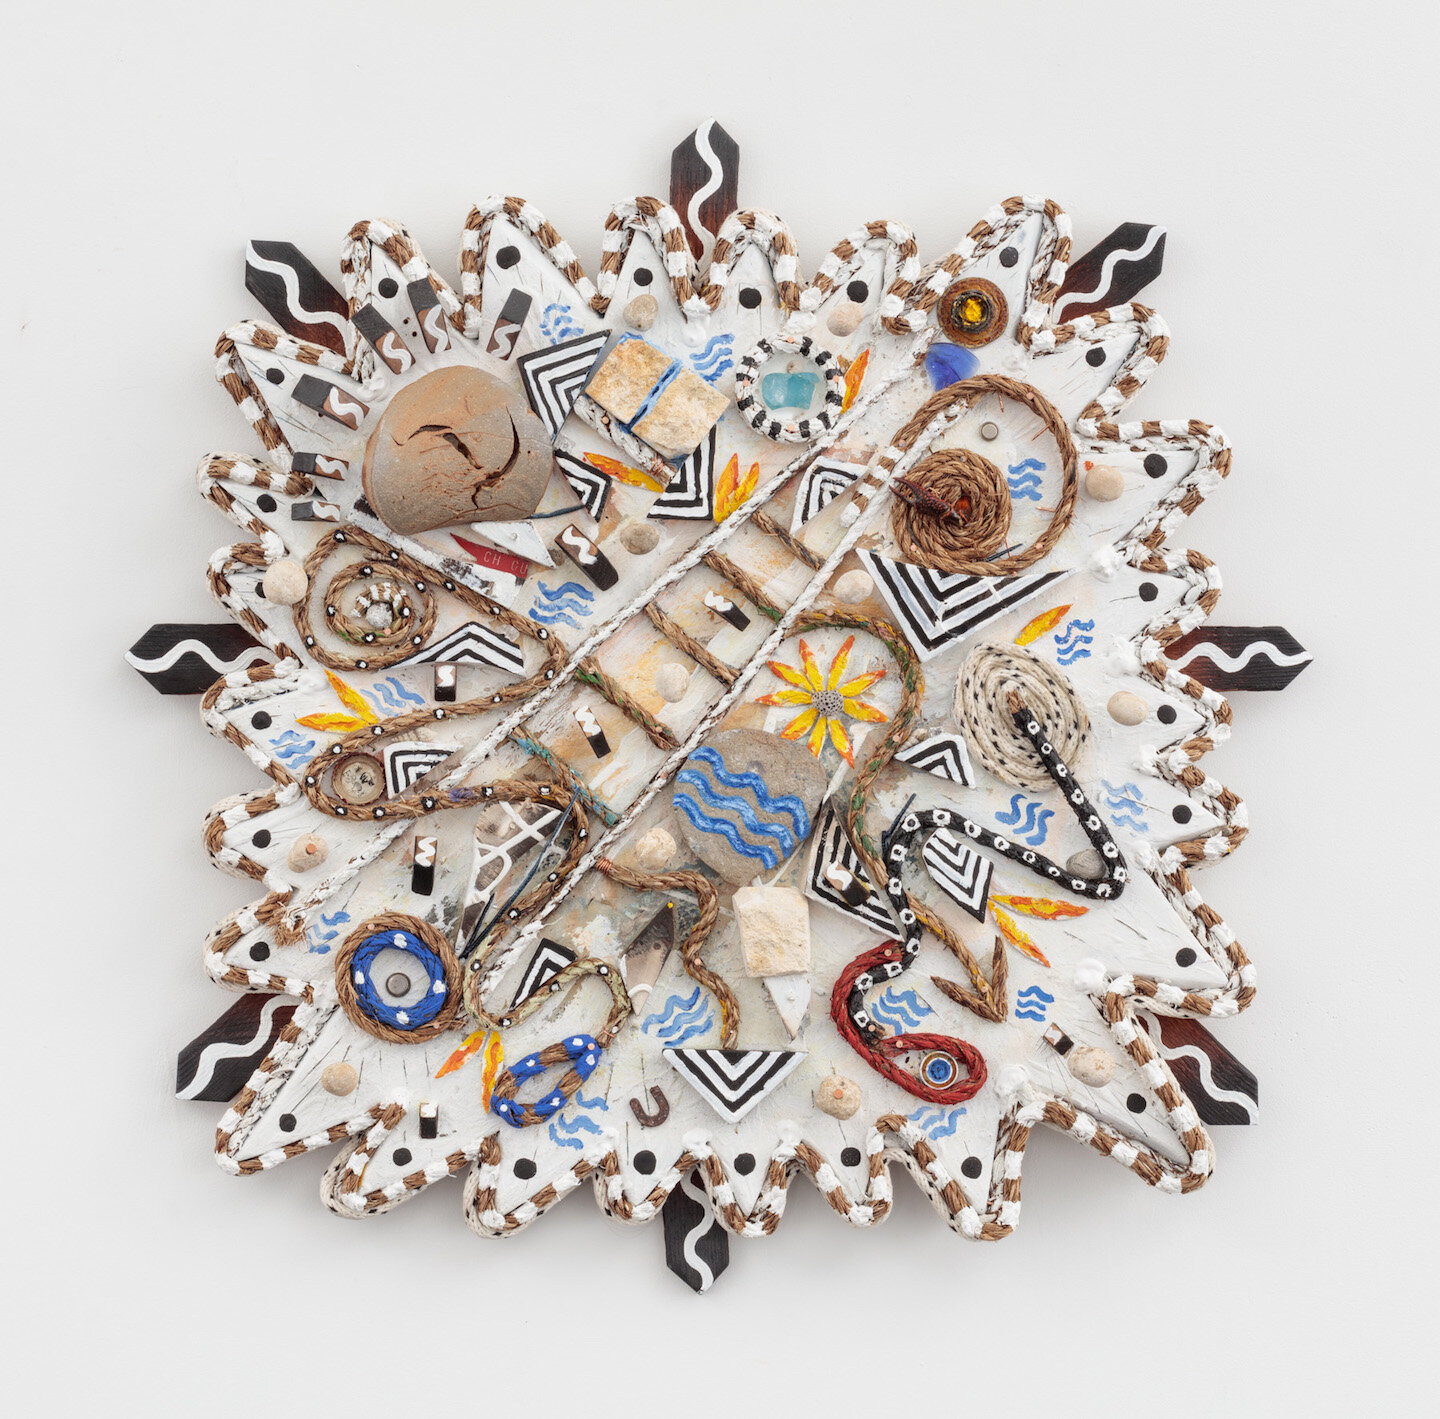  Daniel Rios Rodriguez and Kate Newby,  Passiflora Pirate Utopia , 2018, Oil, acrylic, rope, nails, wood, and other found materials on wood panel, 29 x 29 inches 